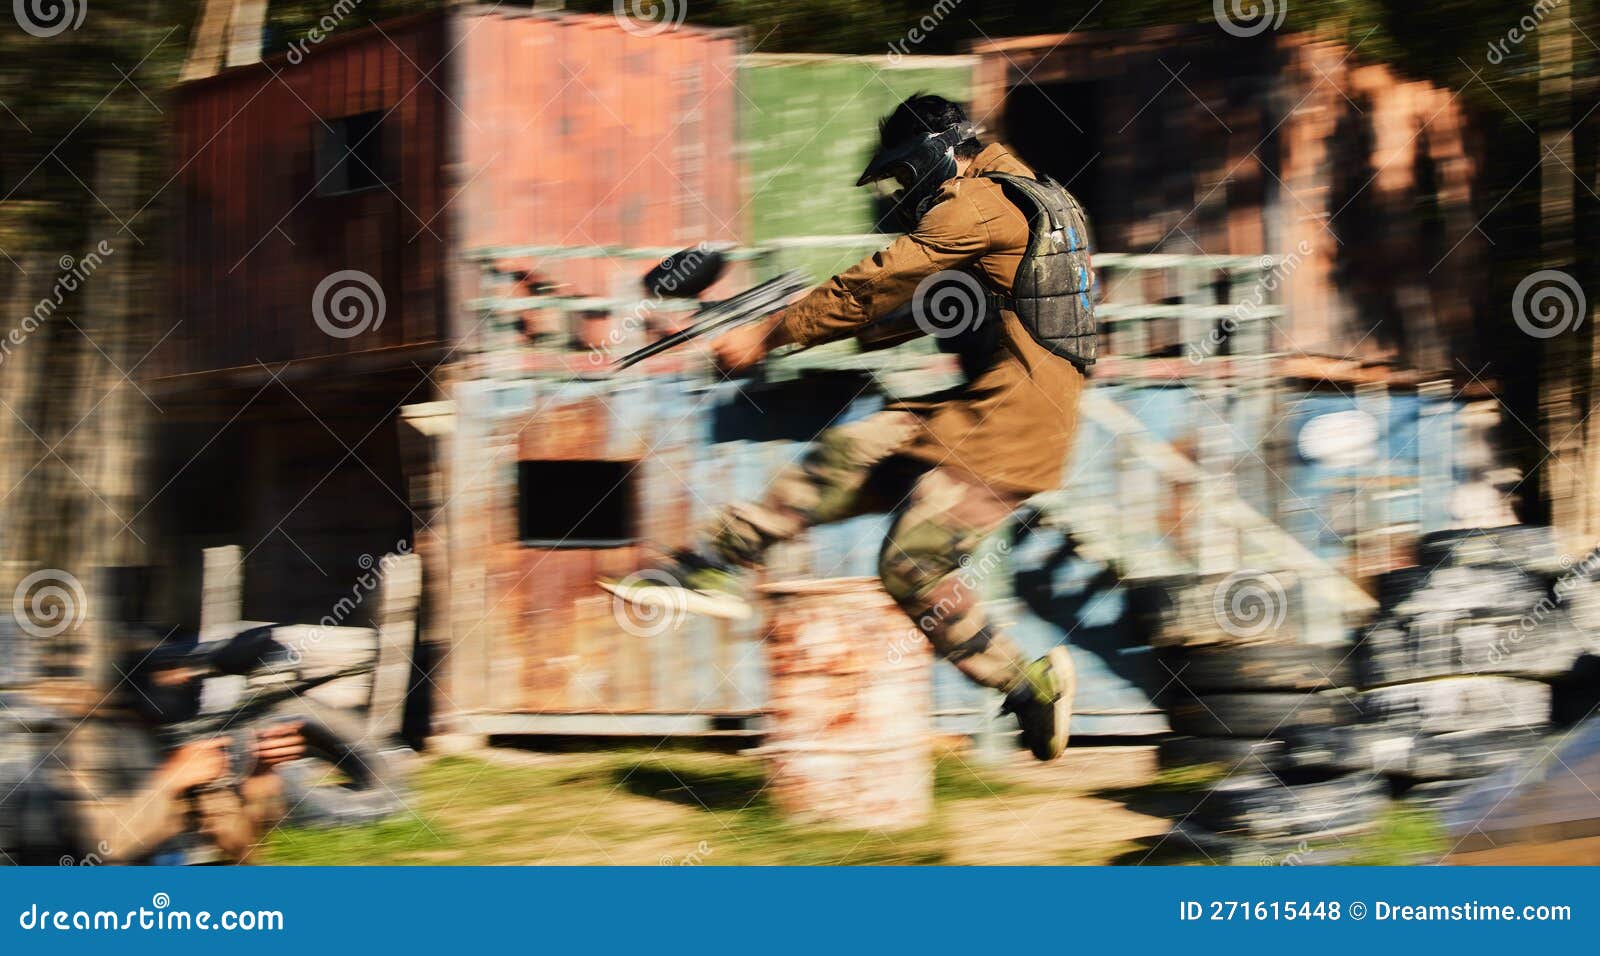 Paintball, Man Jump and Aim Gun at Target, Military Tactics at Shooting  Range and War Game for Sports Outdoor. Soldier Stock Photo - Image of  soldier, military: 271615448